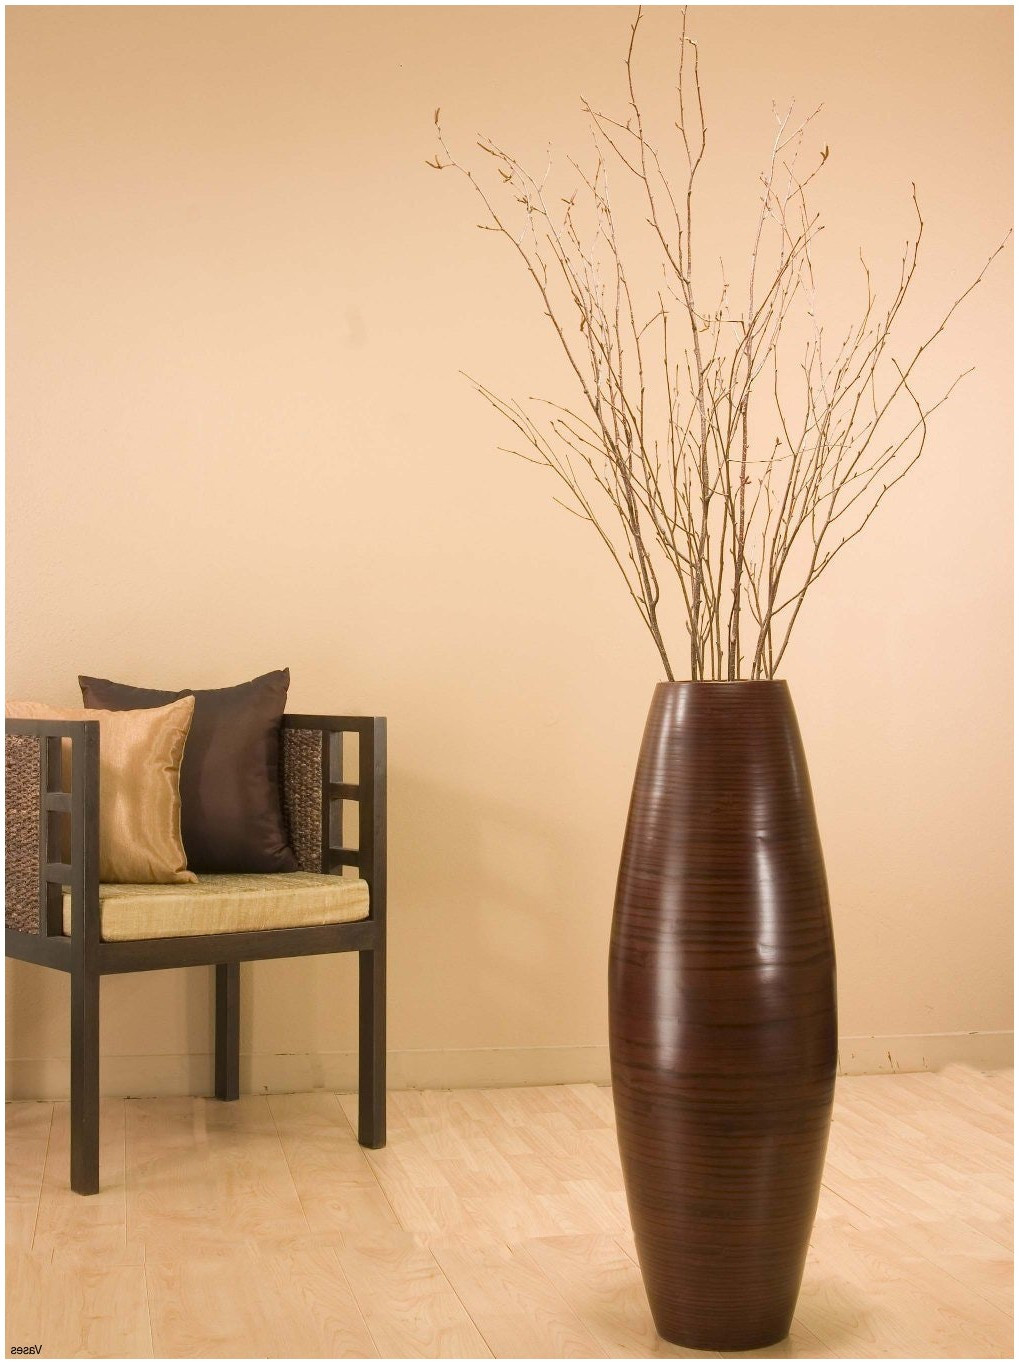 11 attractive Large Wicker Floor Vase 2024 free download large wicker floor vase of 21 beau decorative vases anciendemutu org for 712x0qv9hql sl1364 h vases tall green floor decorative standing with branchesi 0d